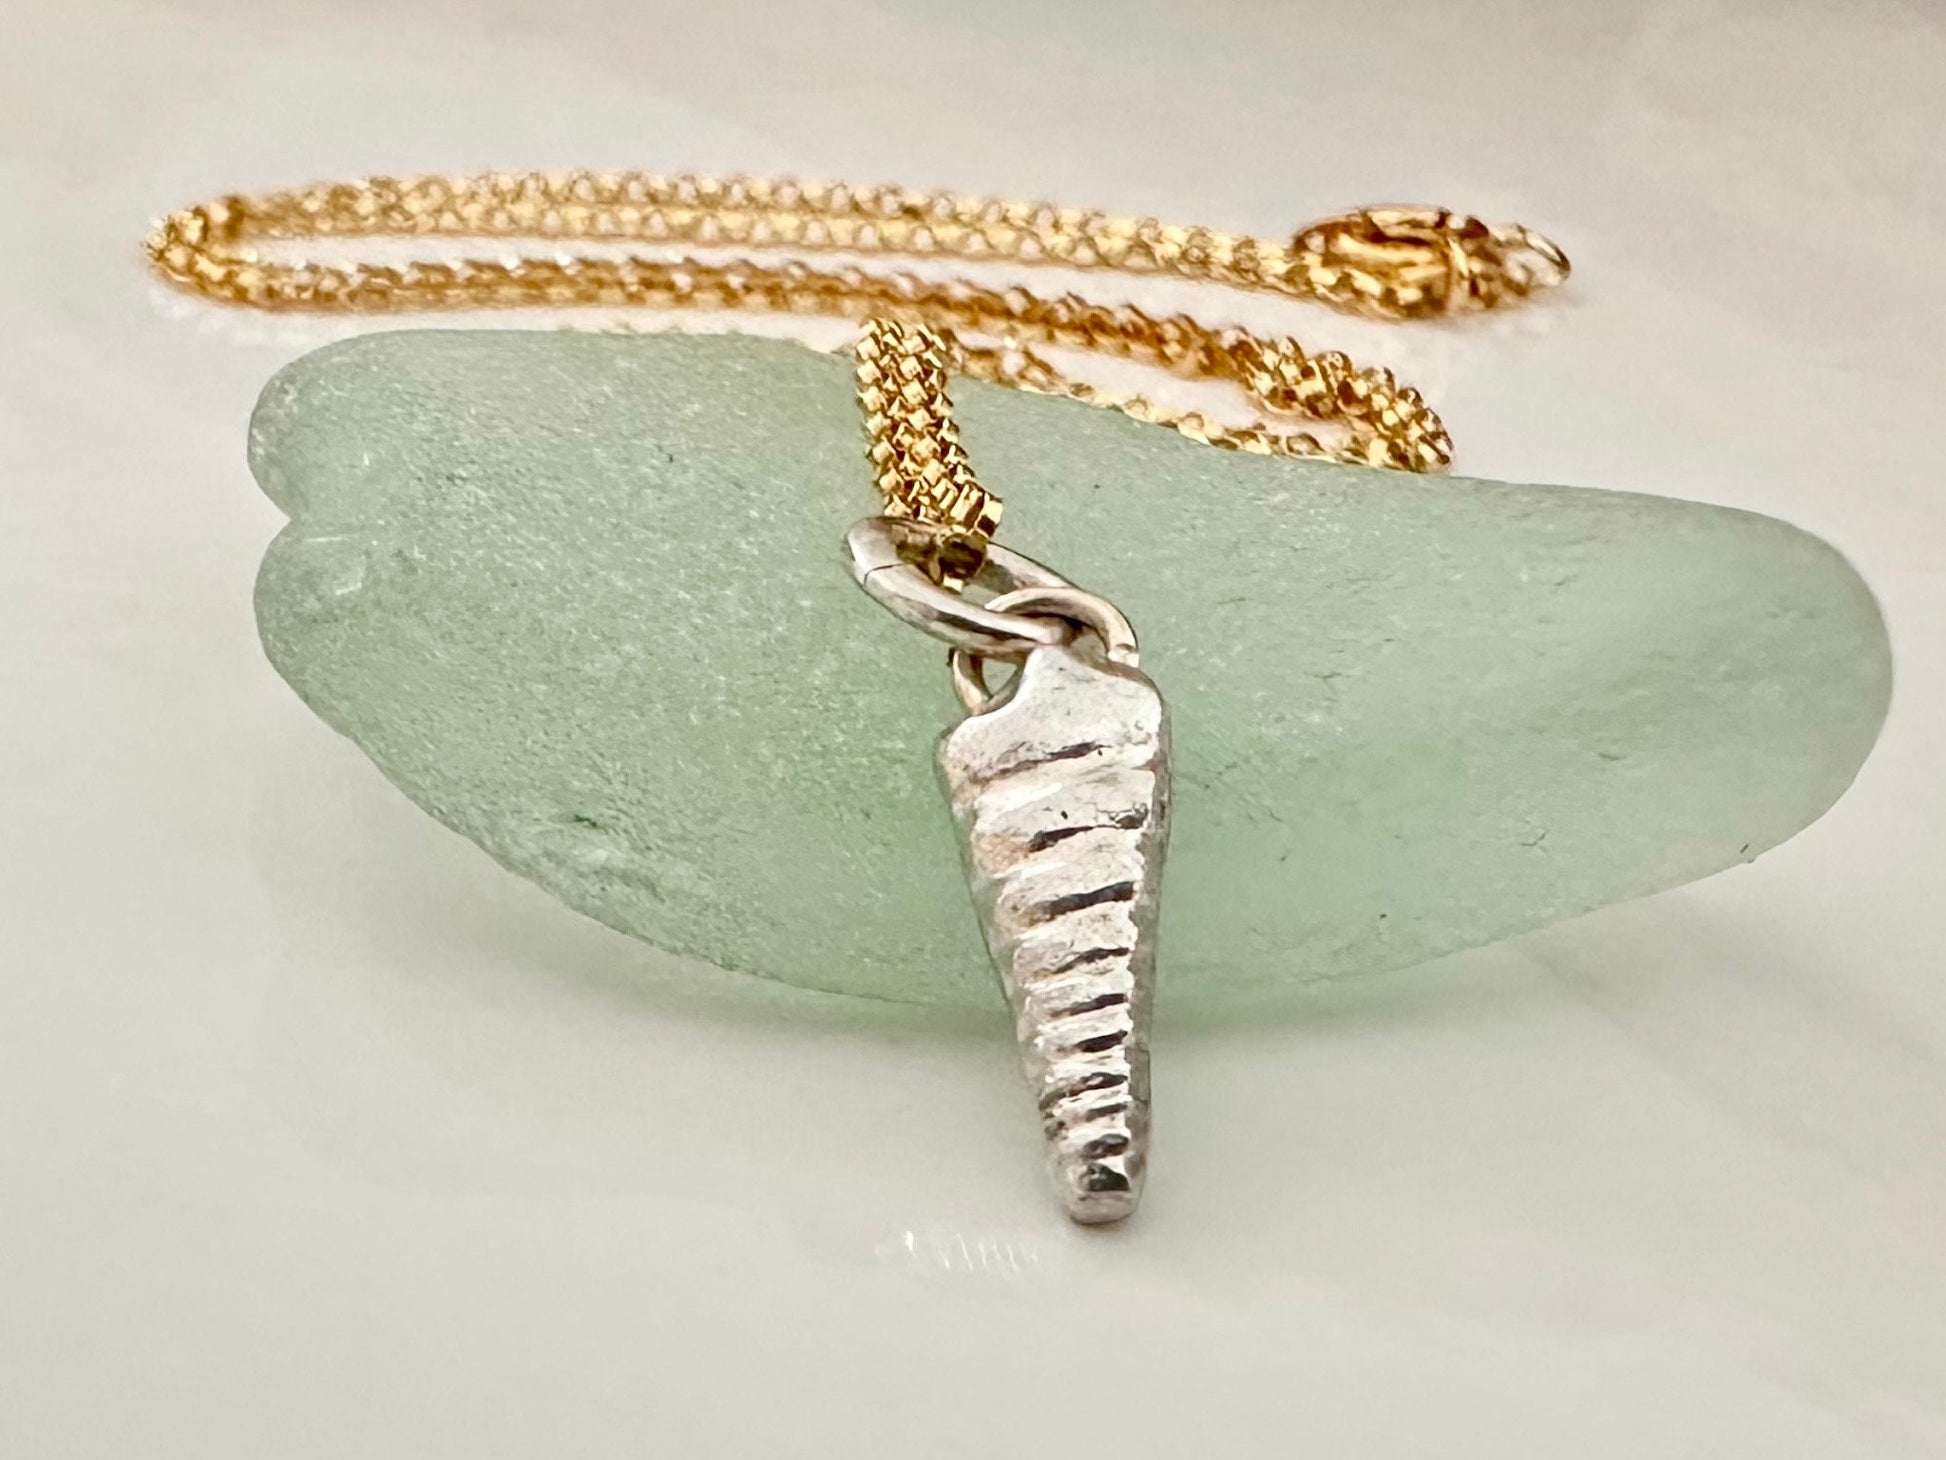 Sterling Silver Turritella Seashell pendant charm necklace with 9ct Gold bail, handmade from recycled 925 Sterling Silver, made to order